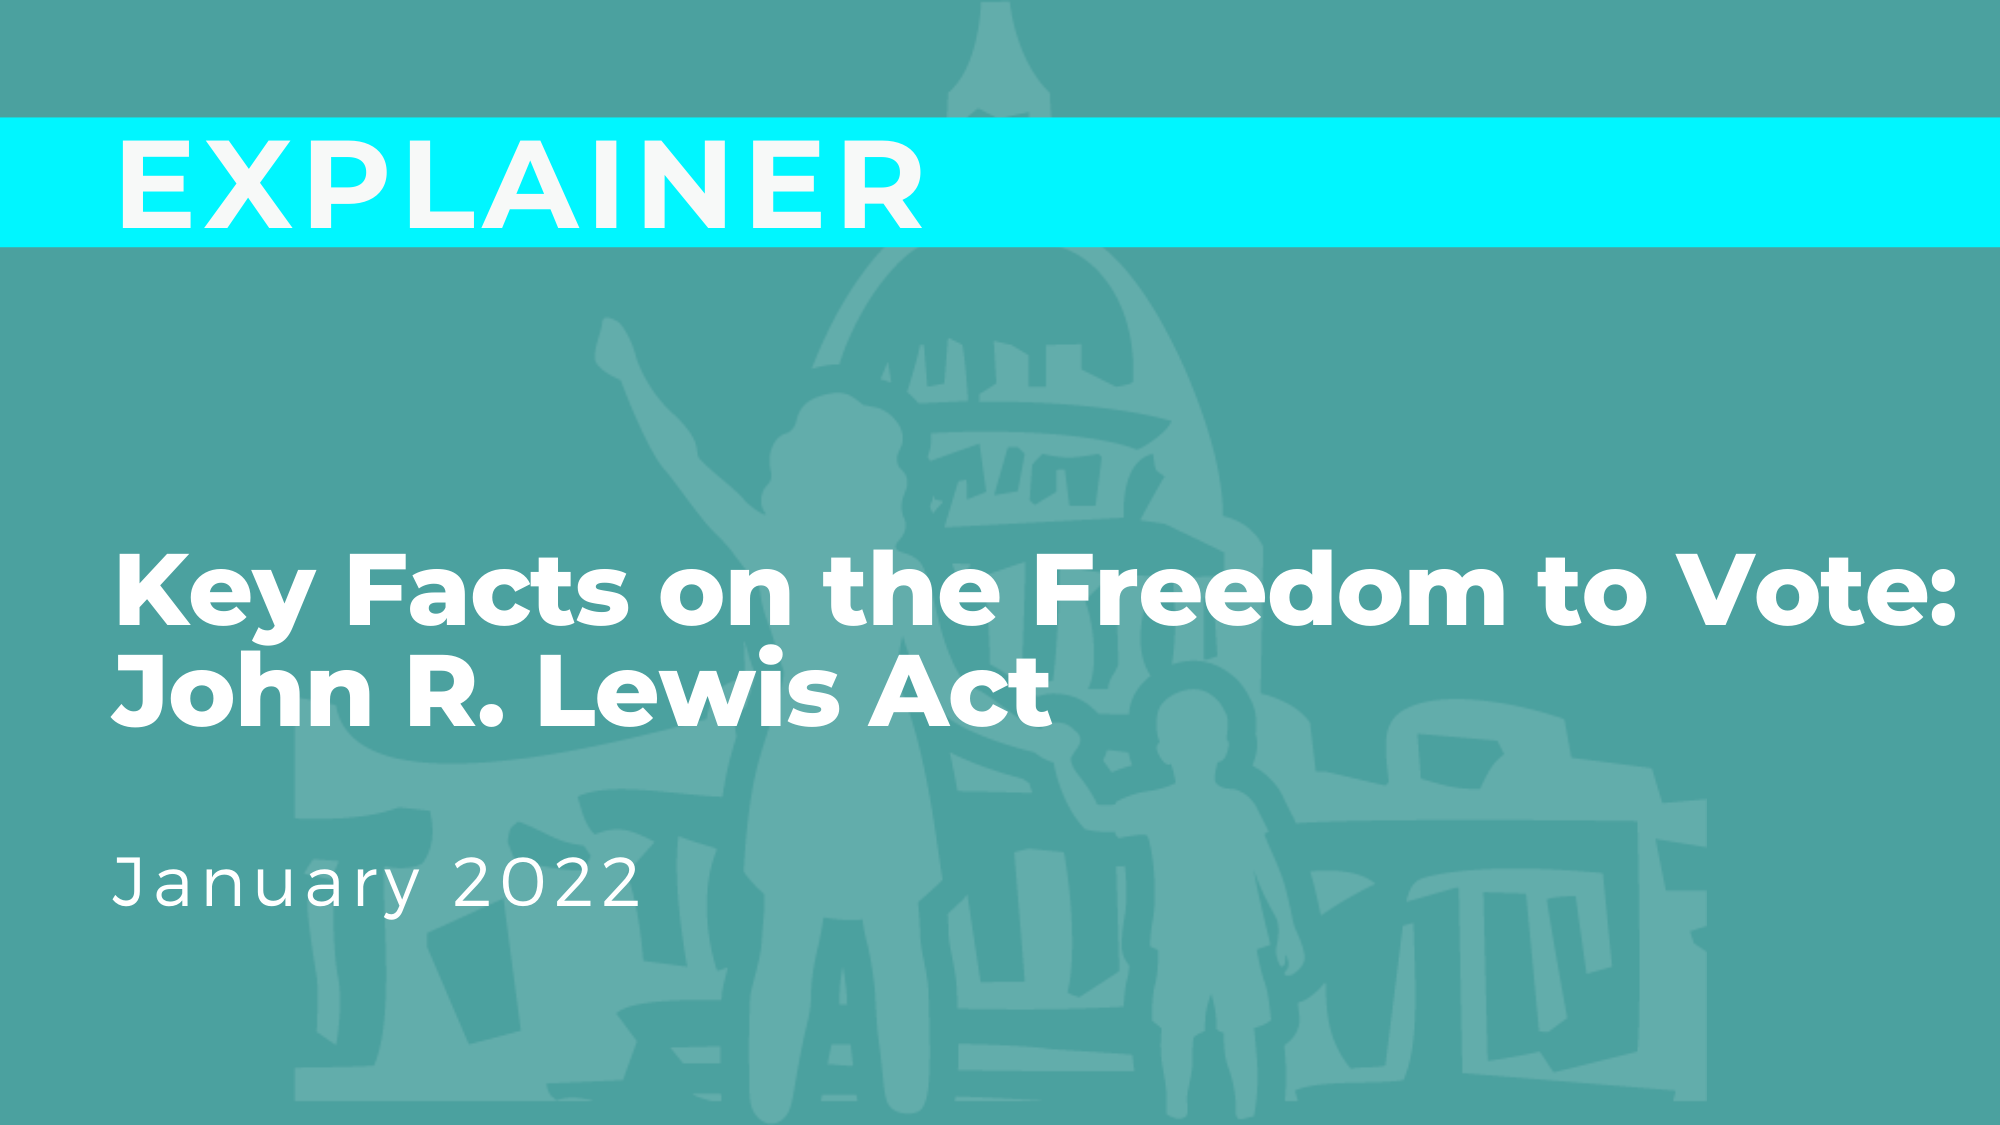 Key Facts on the Freedom to Vote: John R. Lewis Act